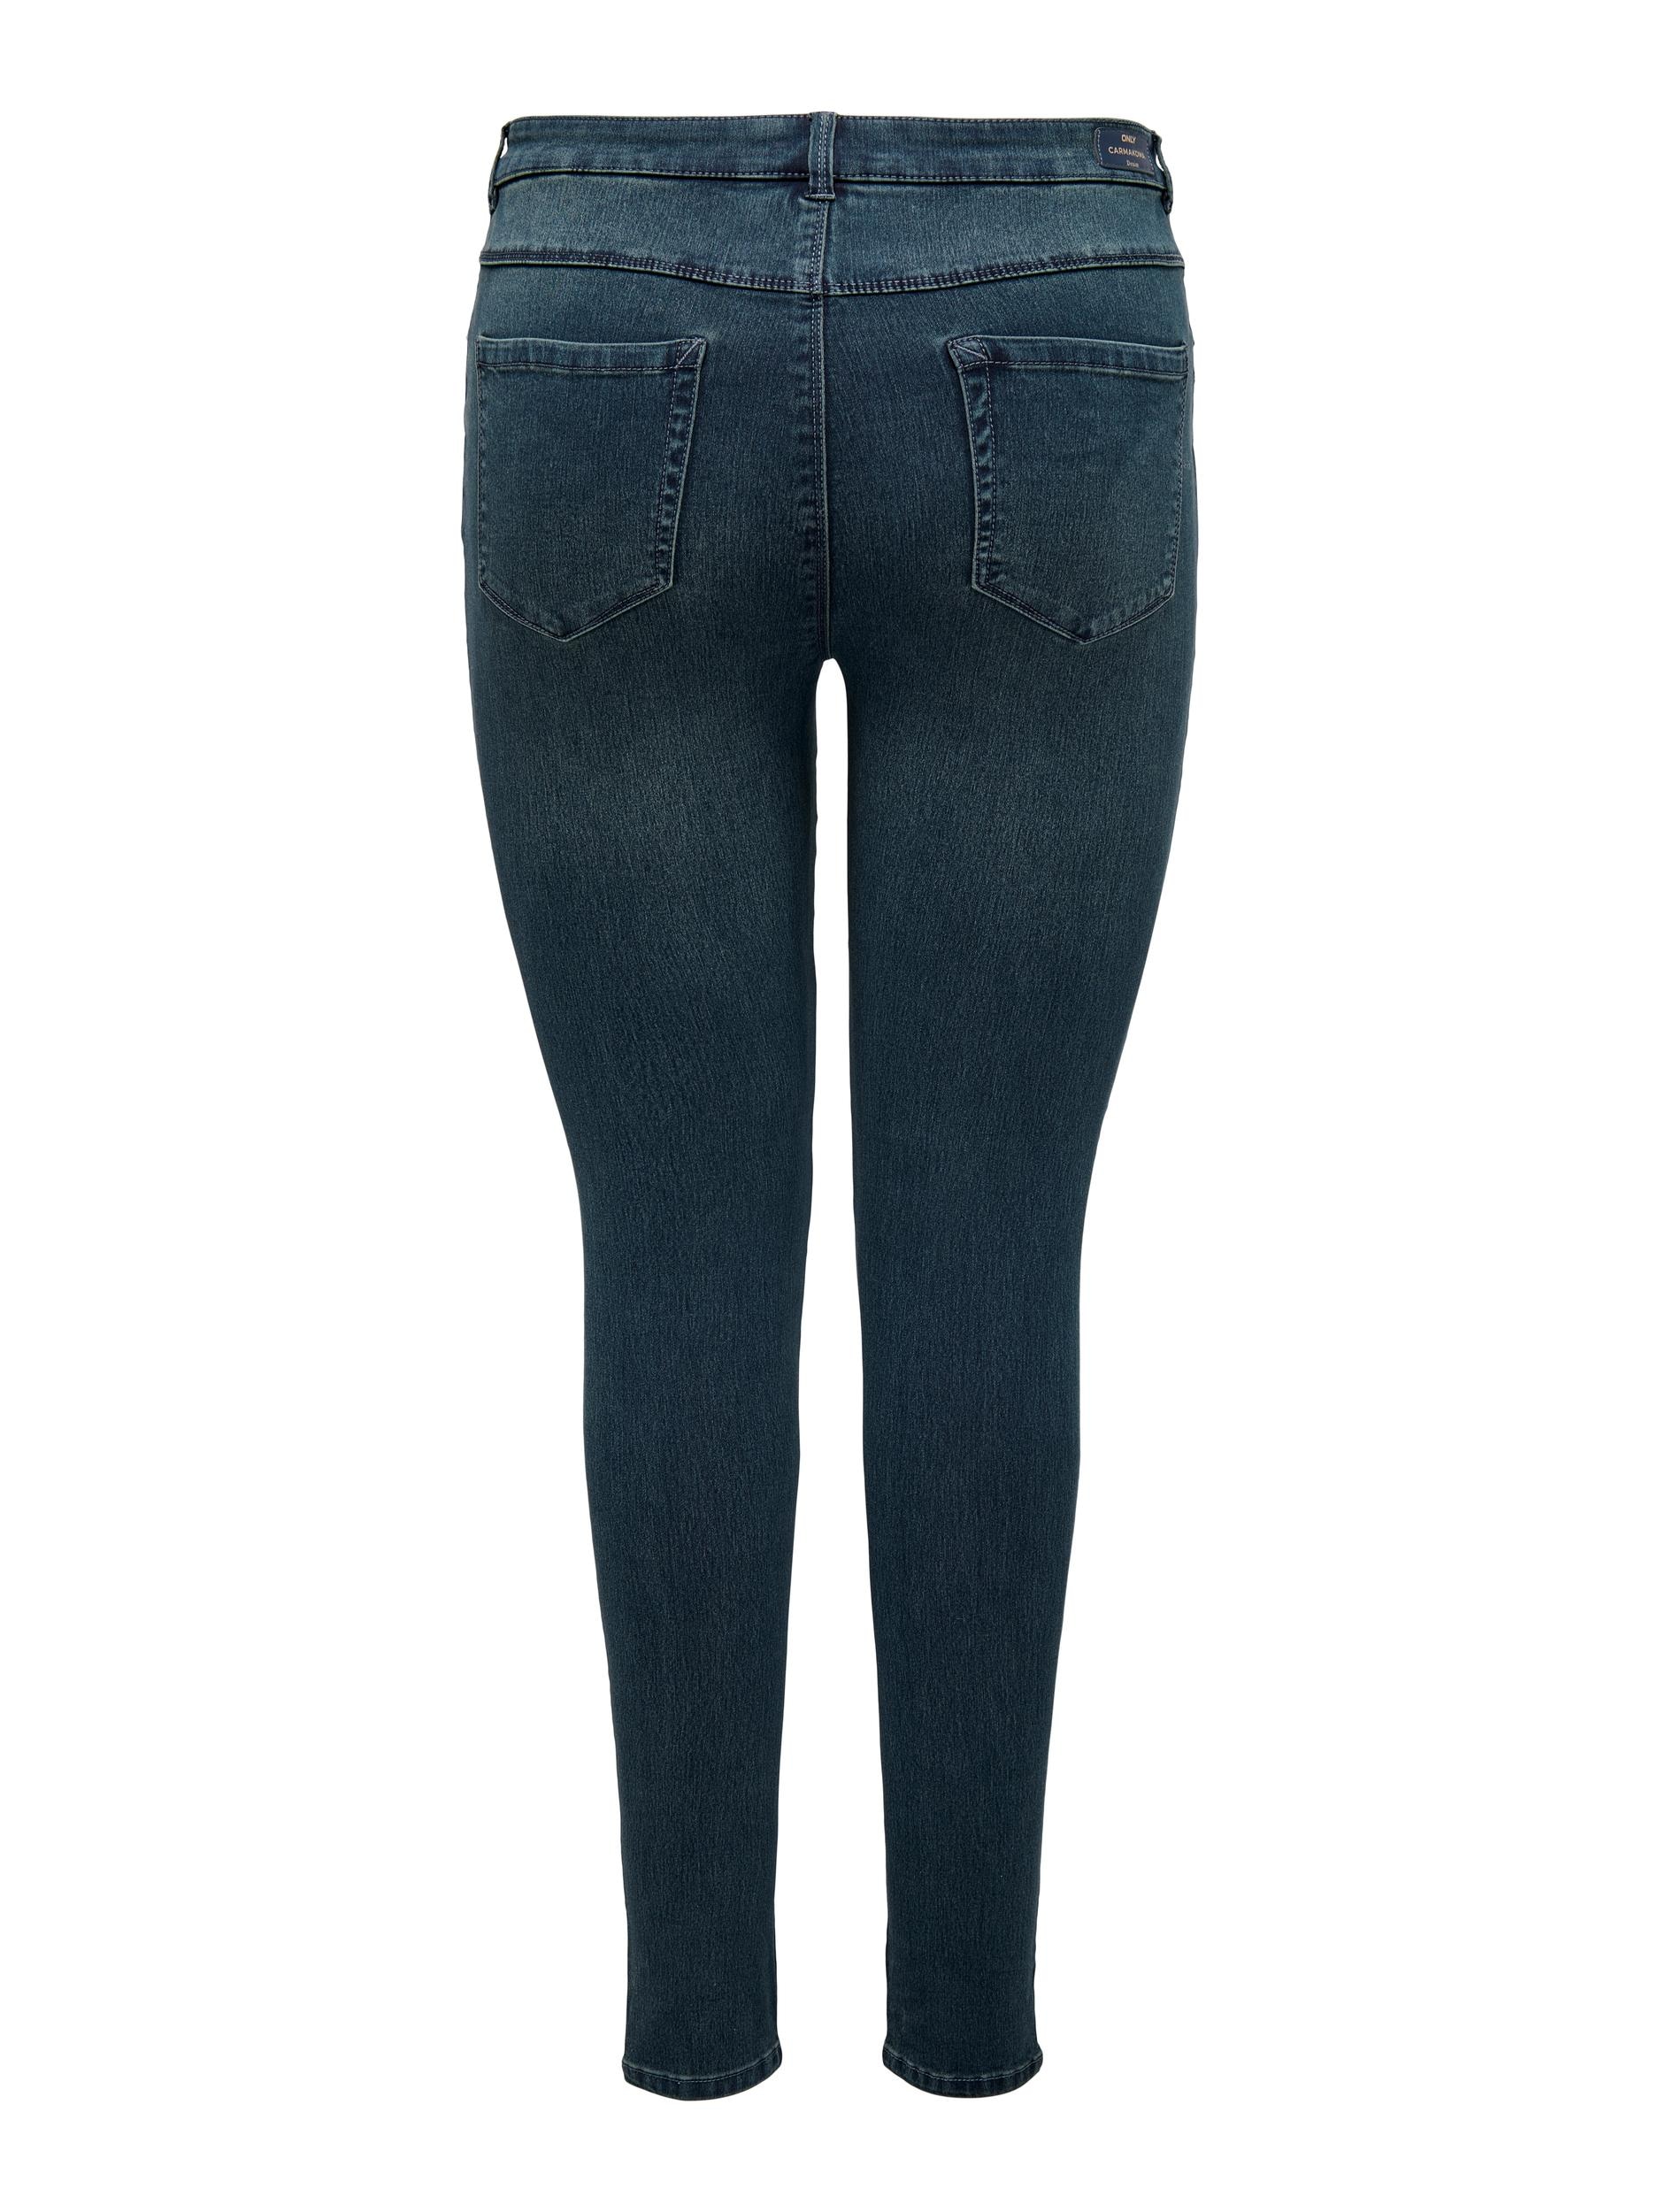 ONLY CARMAKOMA DNM Skinny-fit-Jeans ♕ »CARAUGUSTA NOOS« bei SKINNY BJ558 HW